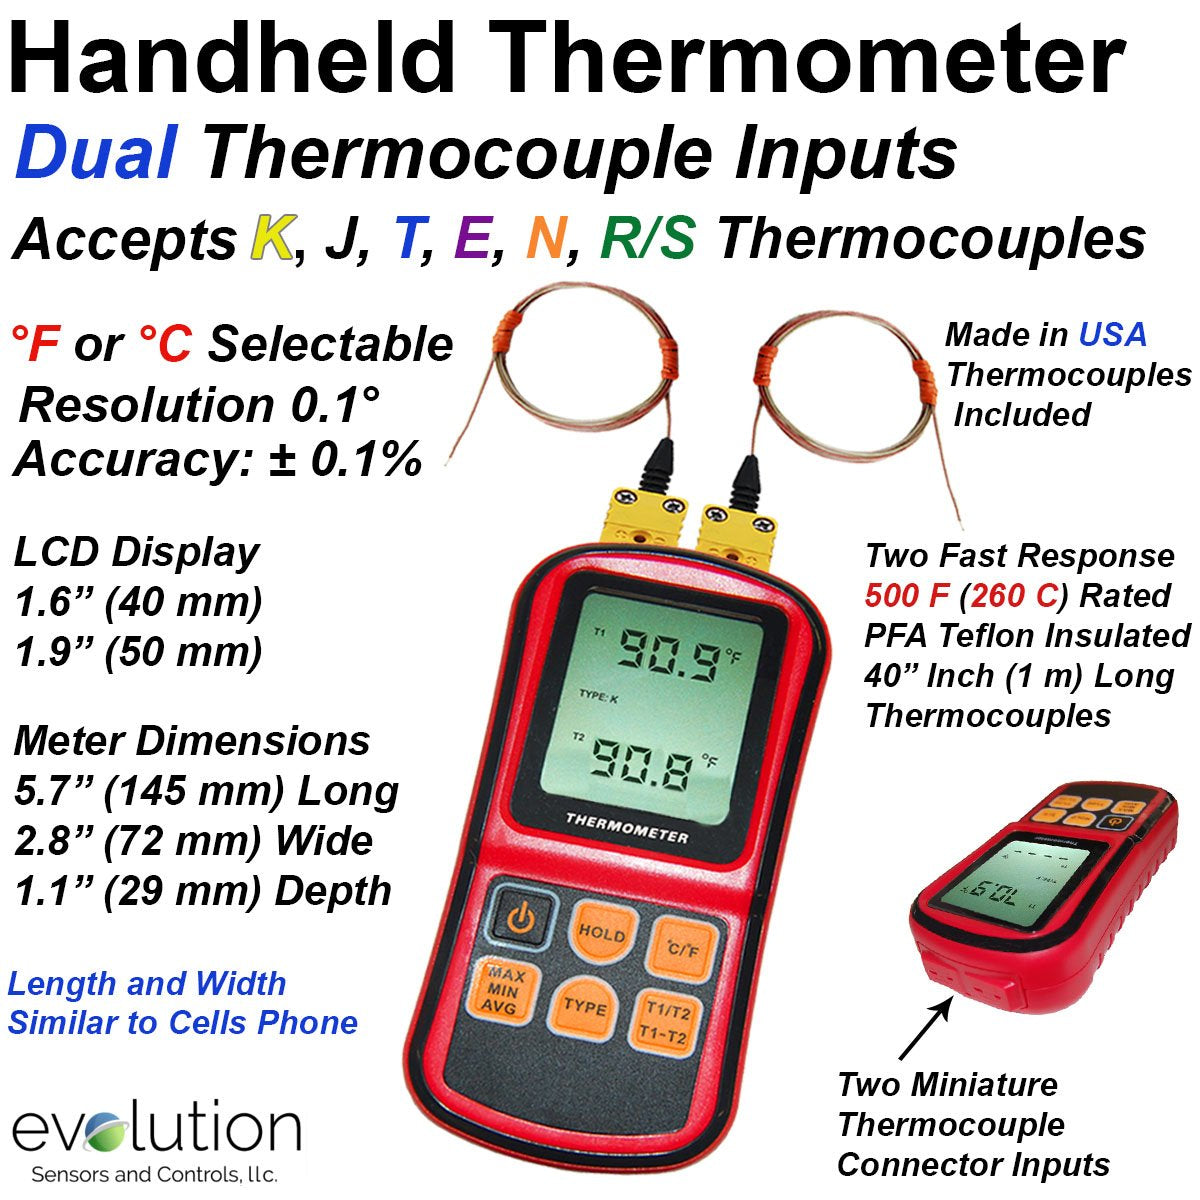 2 Surface Mount Dial Dual Temperature Range Thermometers